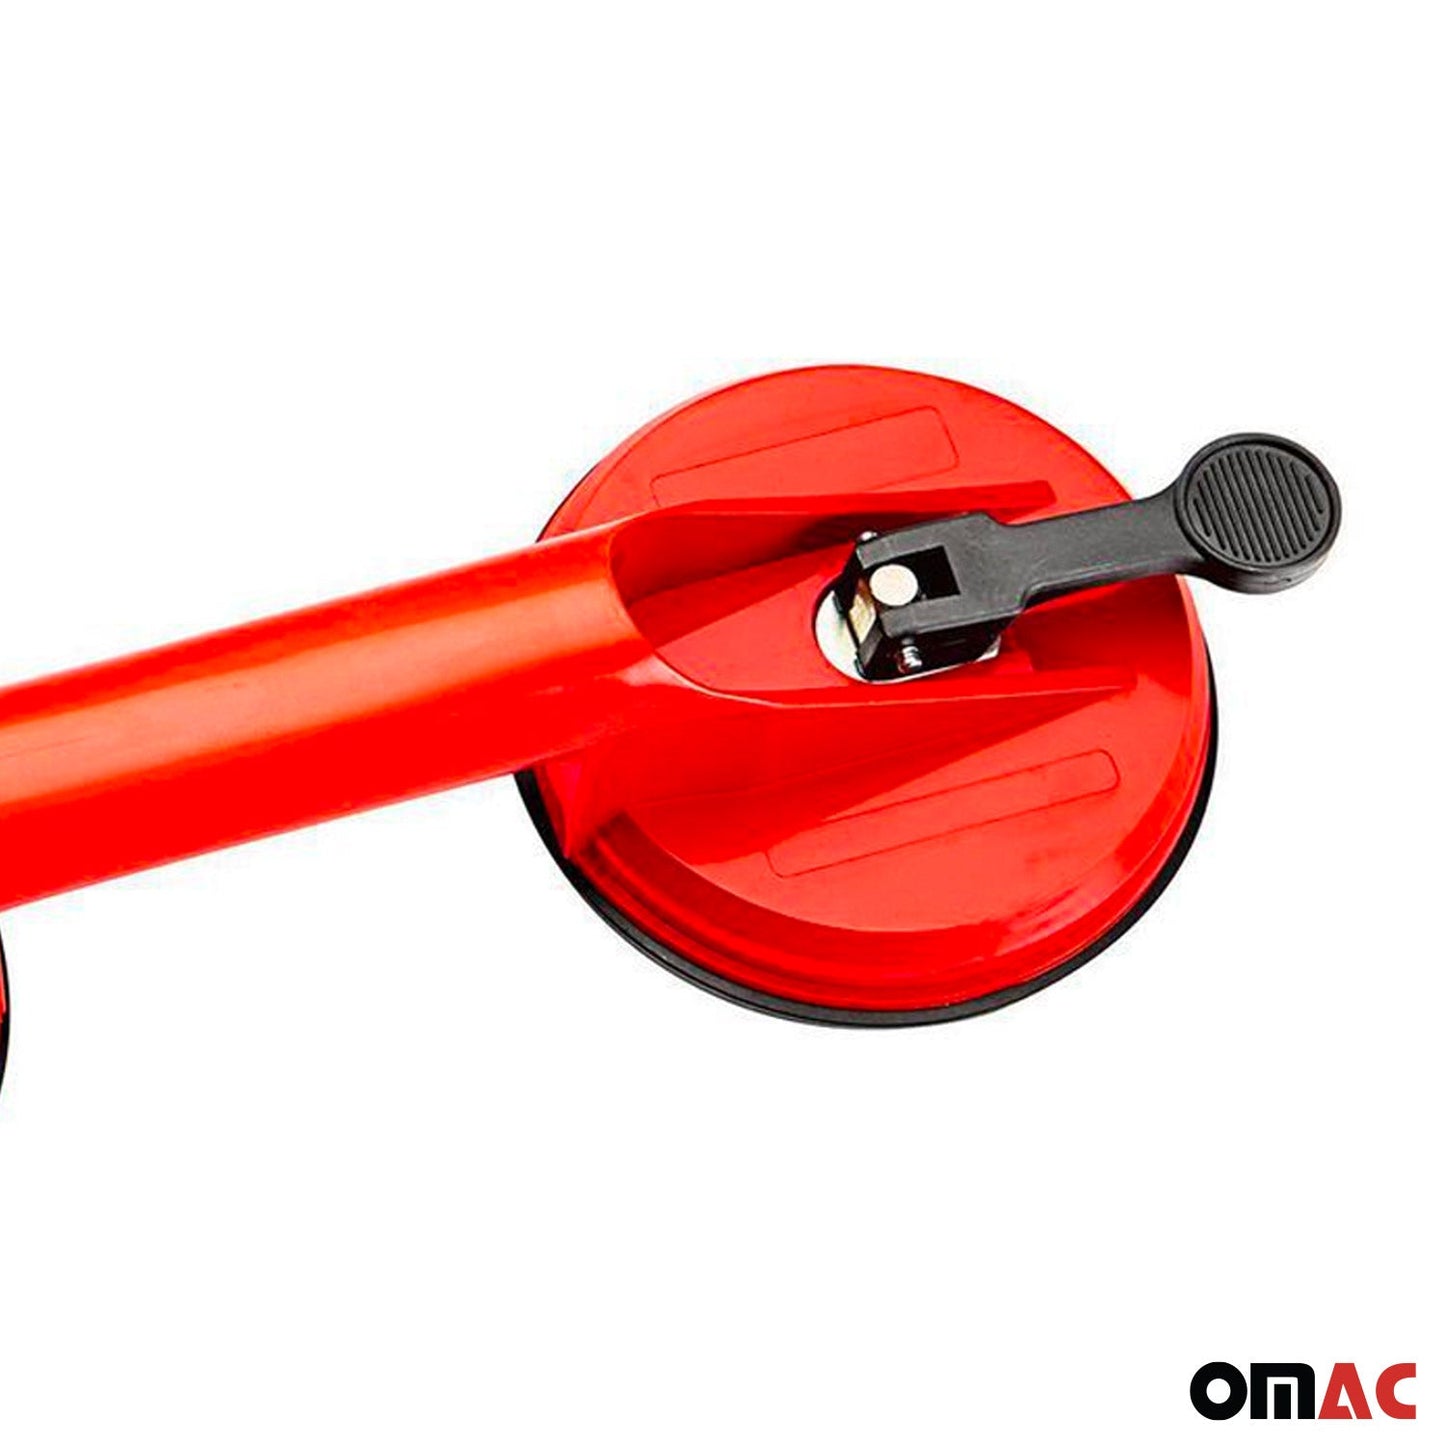 OMAC Double Suction Cup Vacuum Lifter for Glass Lifting Granite Mirror Handle Grip 96HF59689